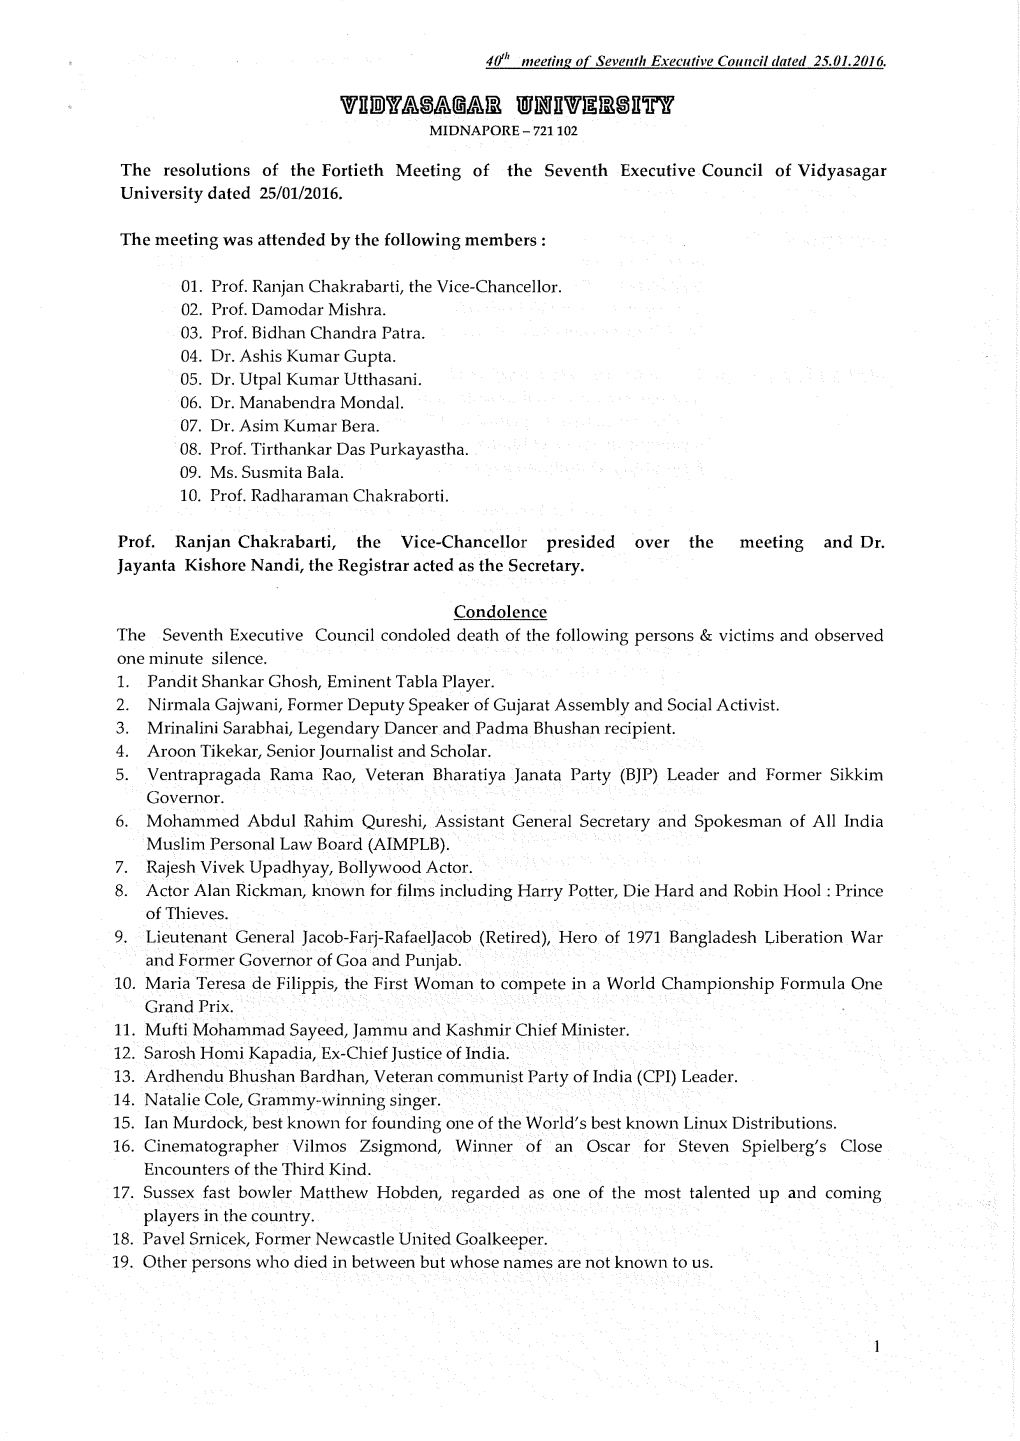 The Resolutions of the Fortieth Meeting of the Seventh Executive Council of Vidyasagar University Dated 25/01/2016